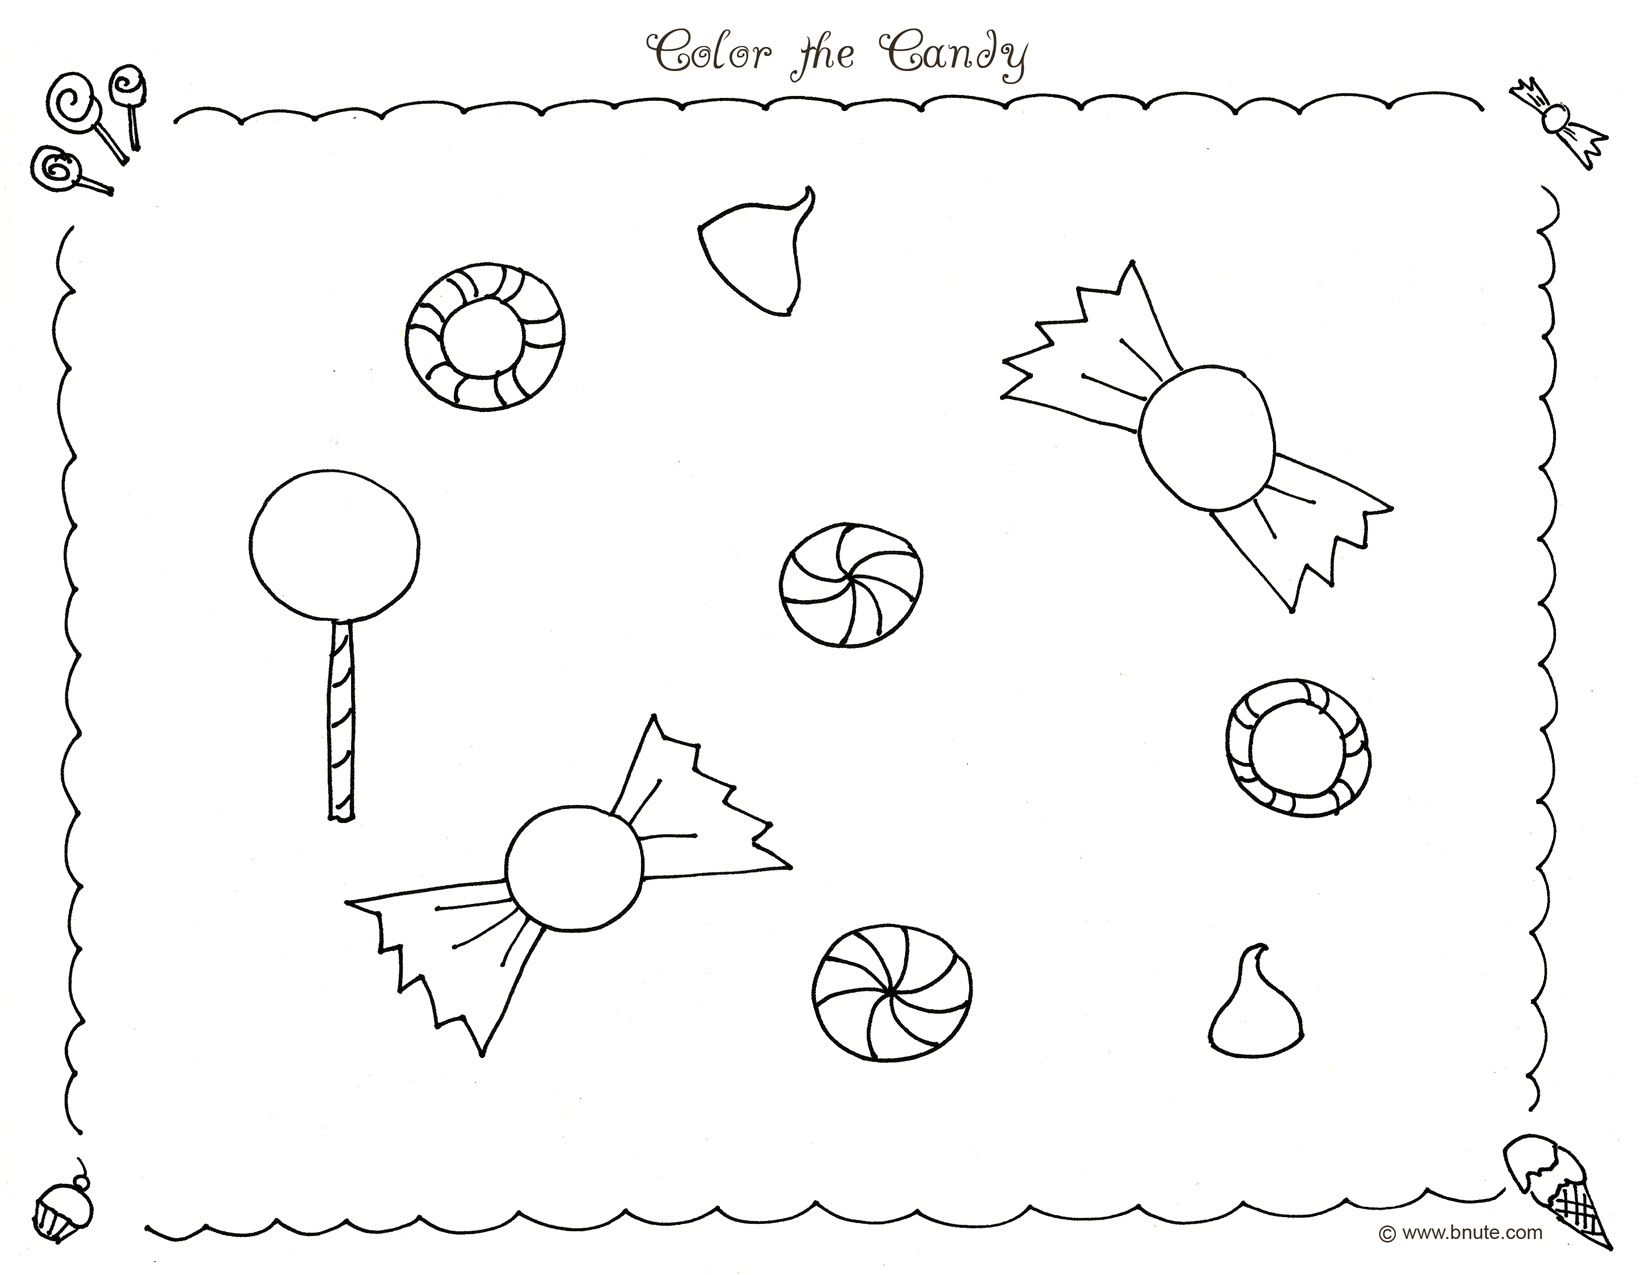 Candyland Characters Coloring Pages Free Printable Candyland Coloring Pages For Kids